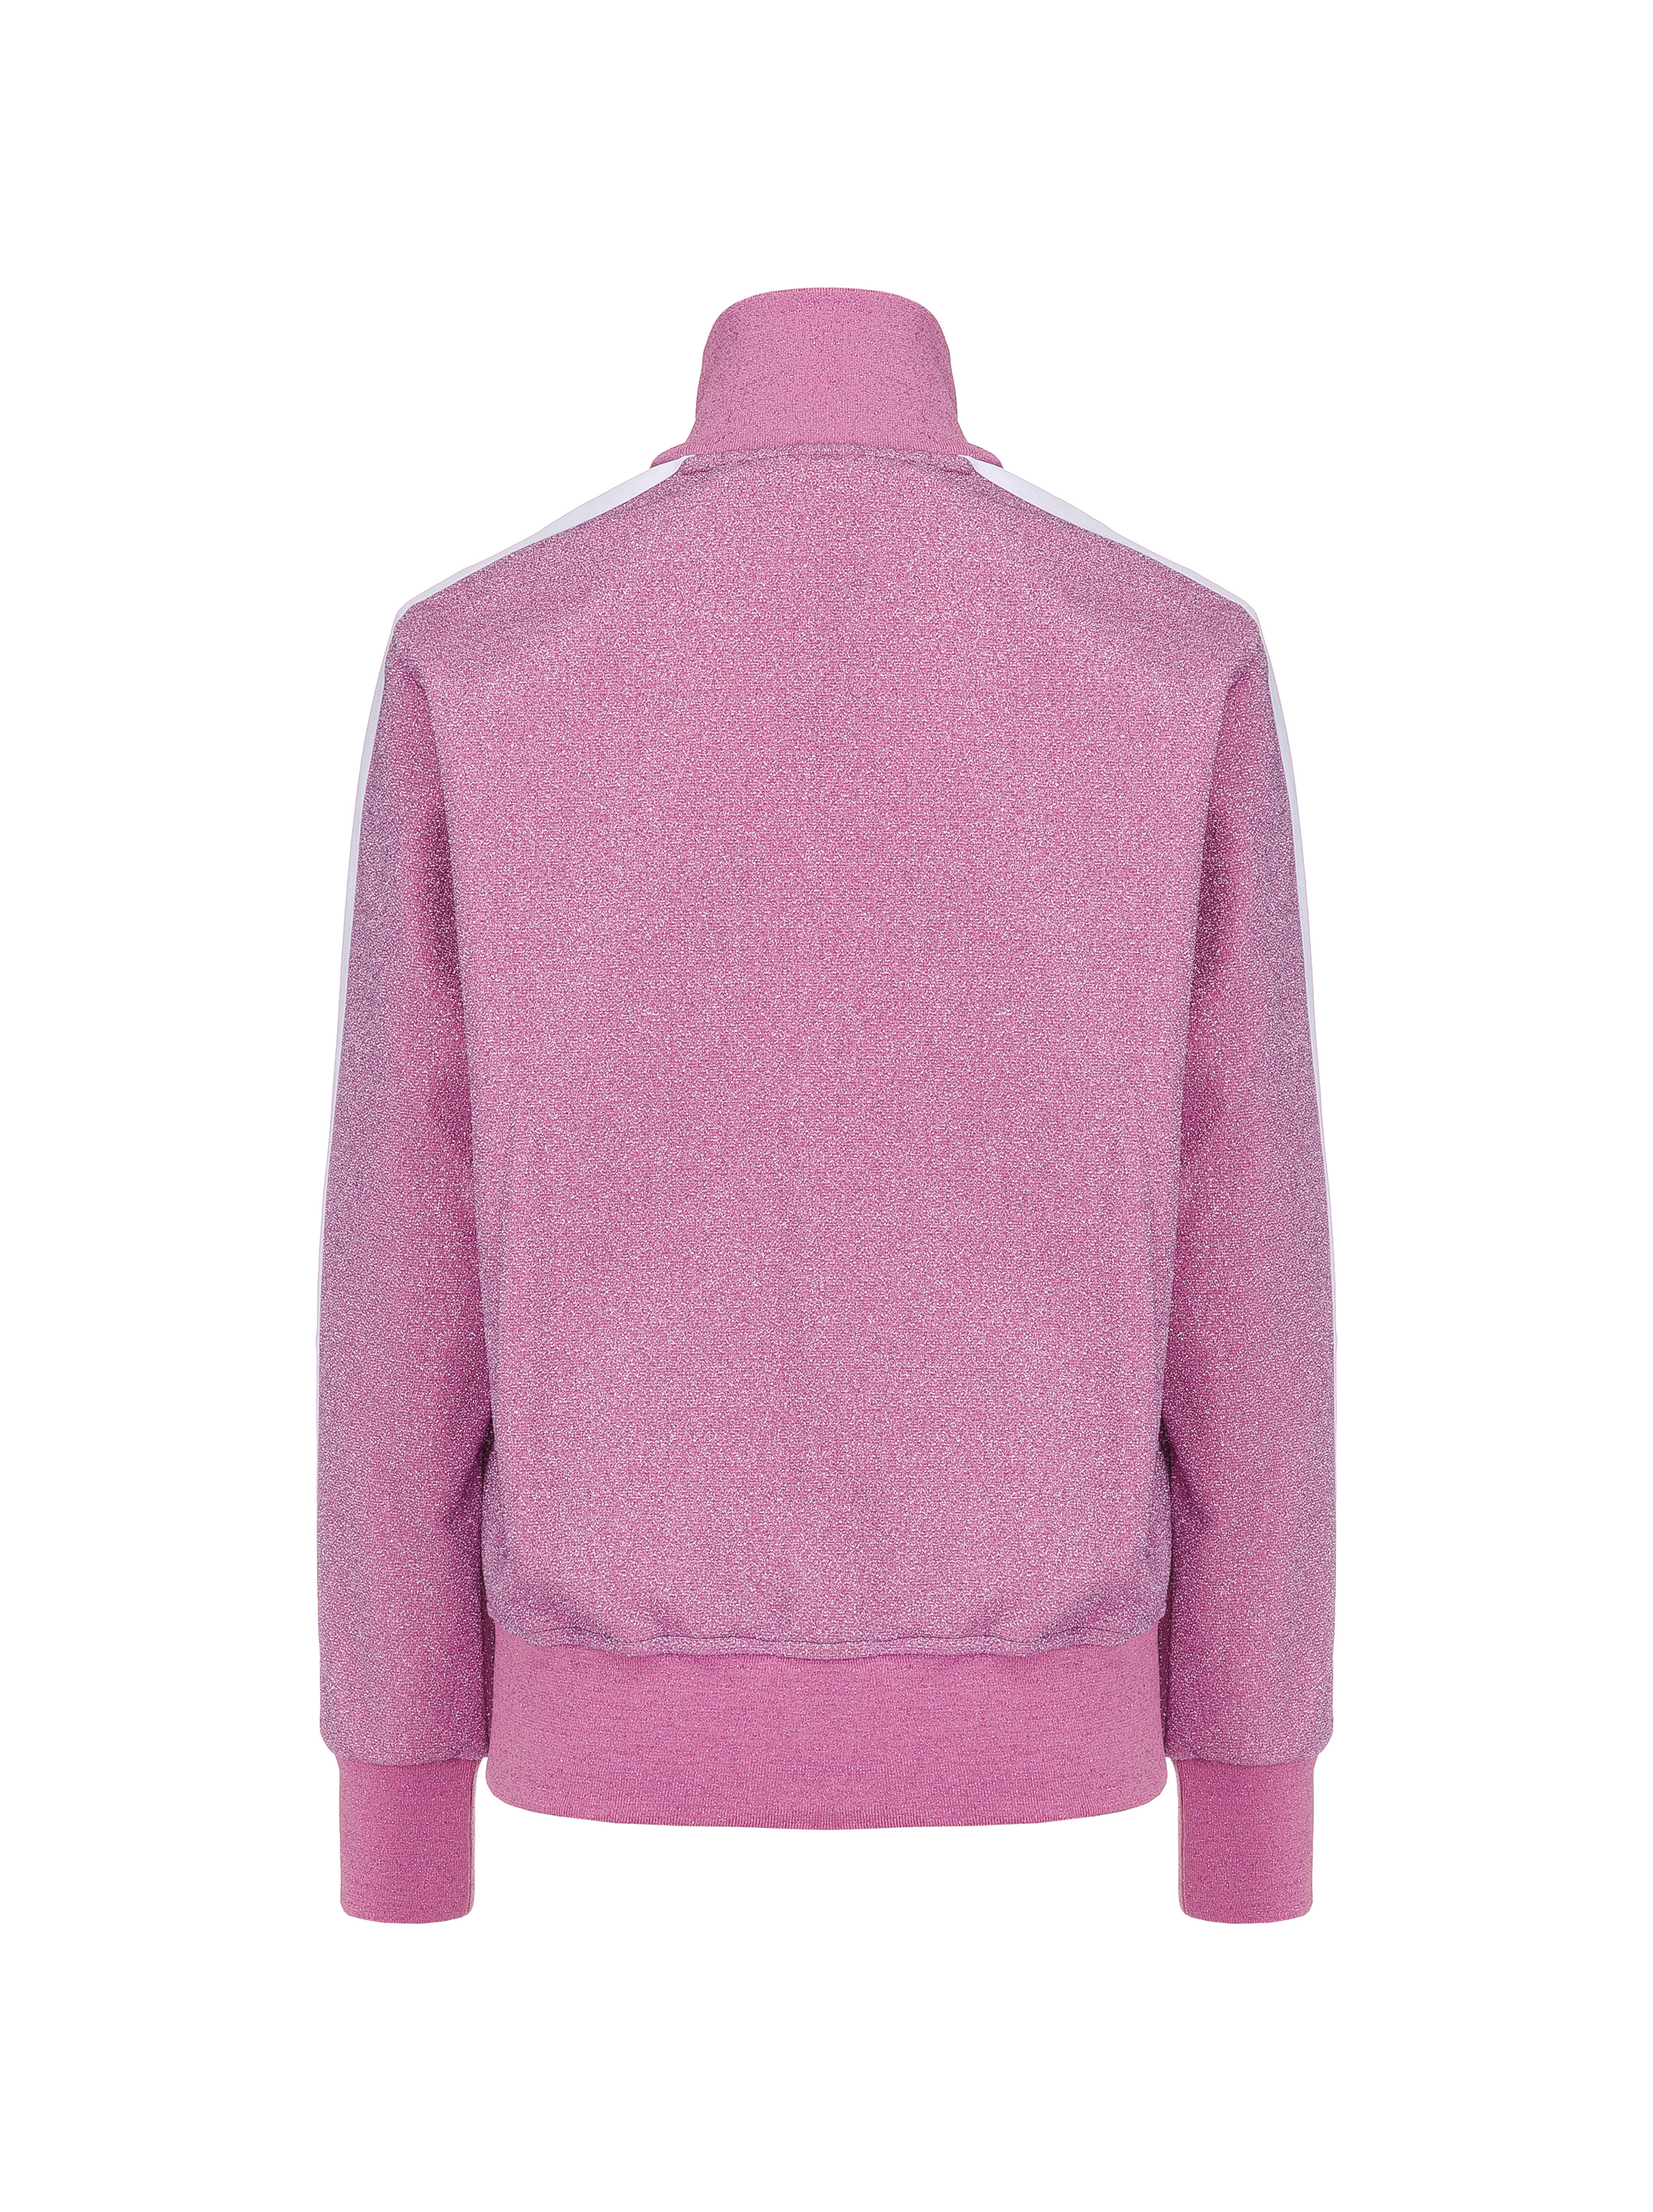 Palm Angels Track Jacket in pink - Palm Angels® Official